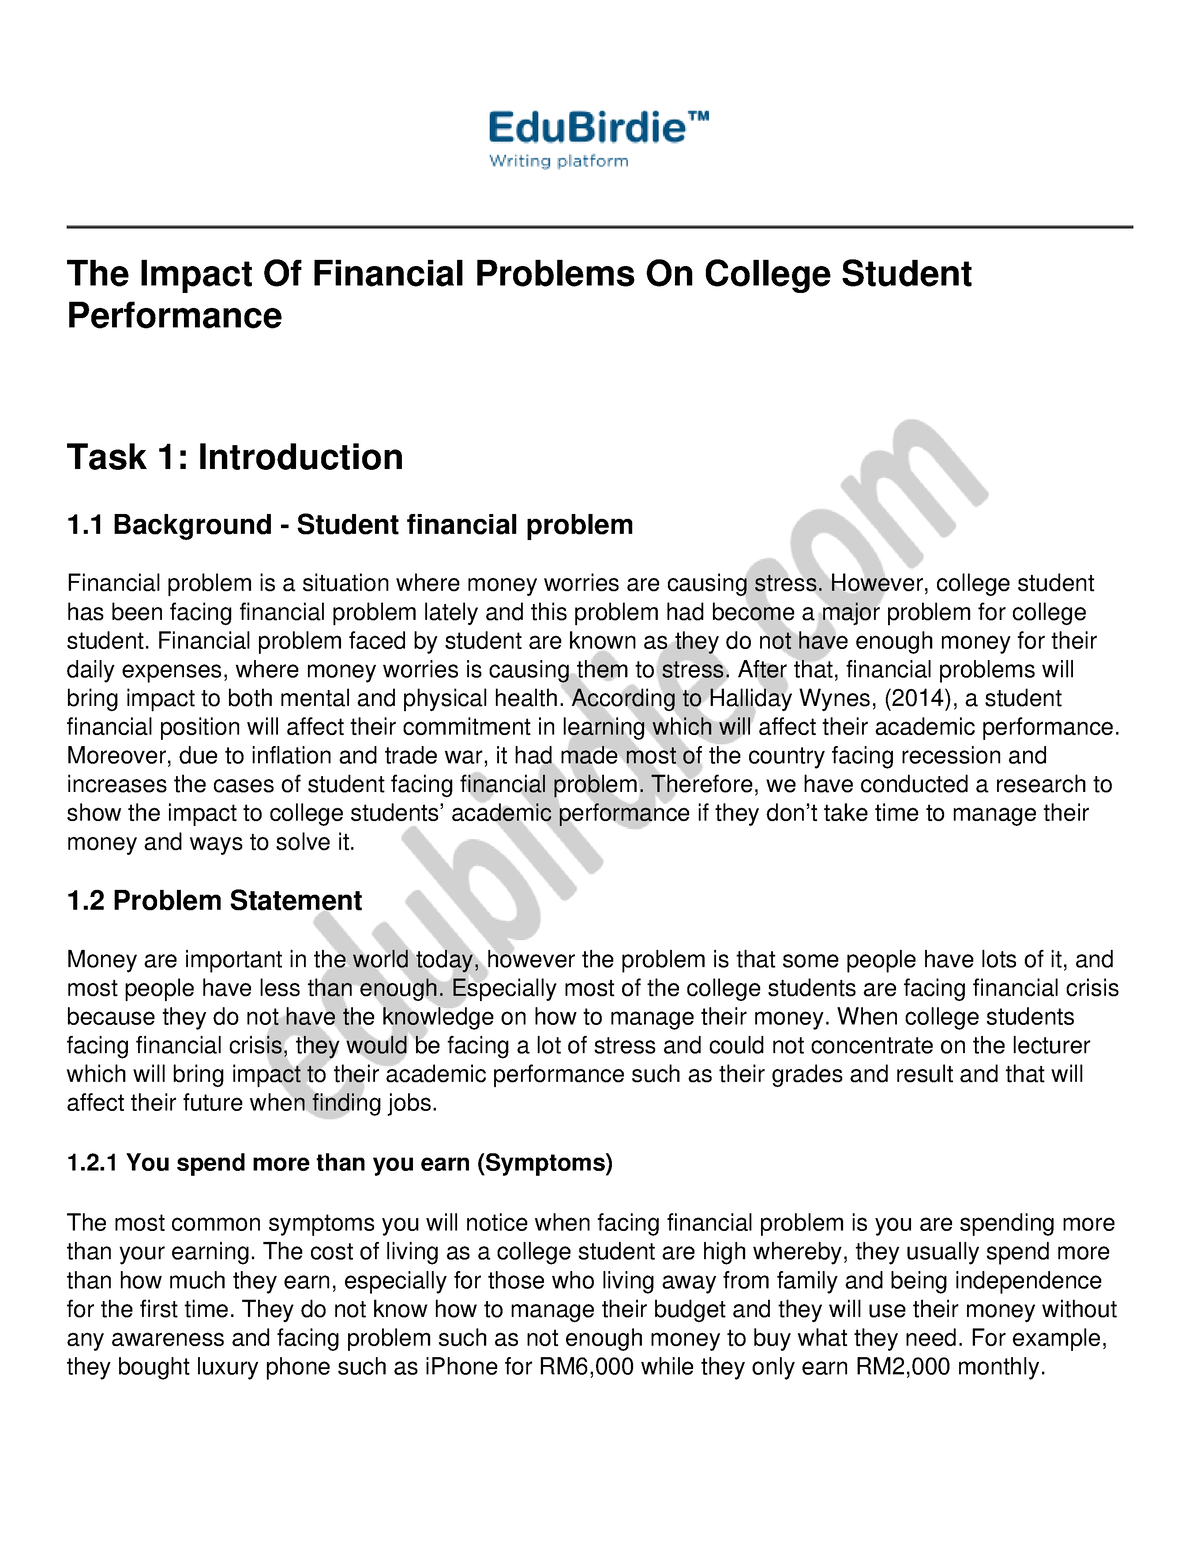 research title about financial problem of students